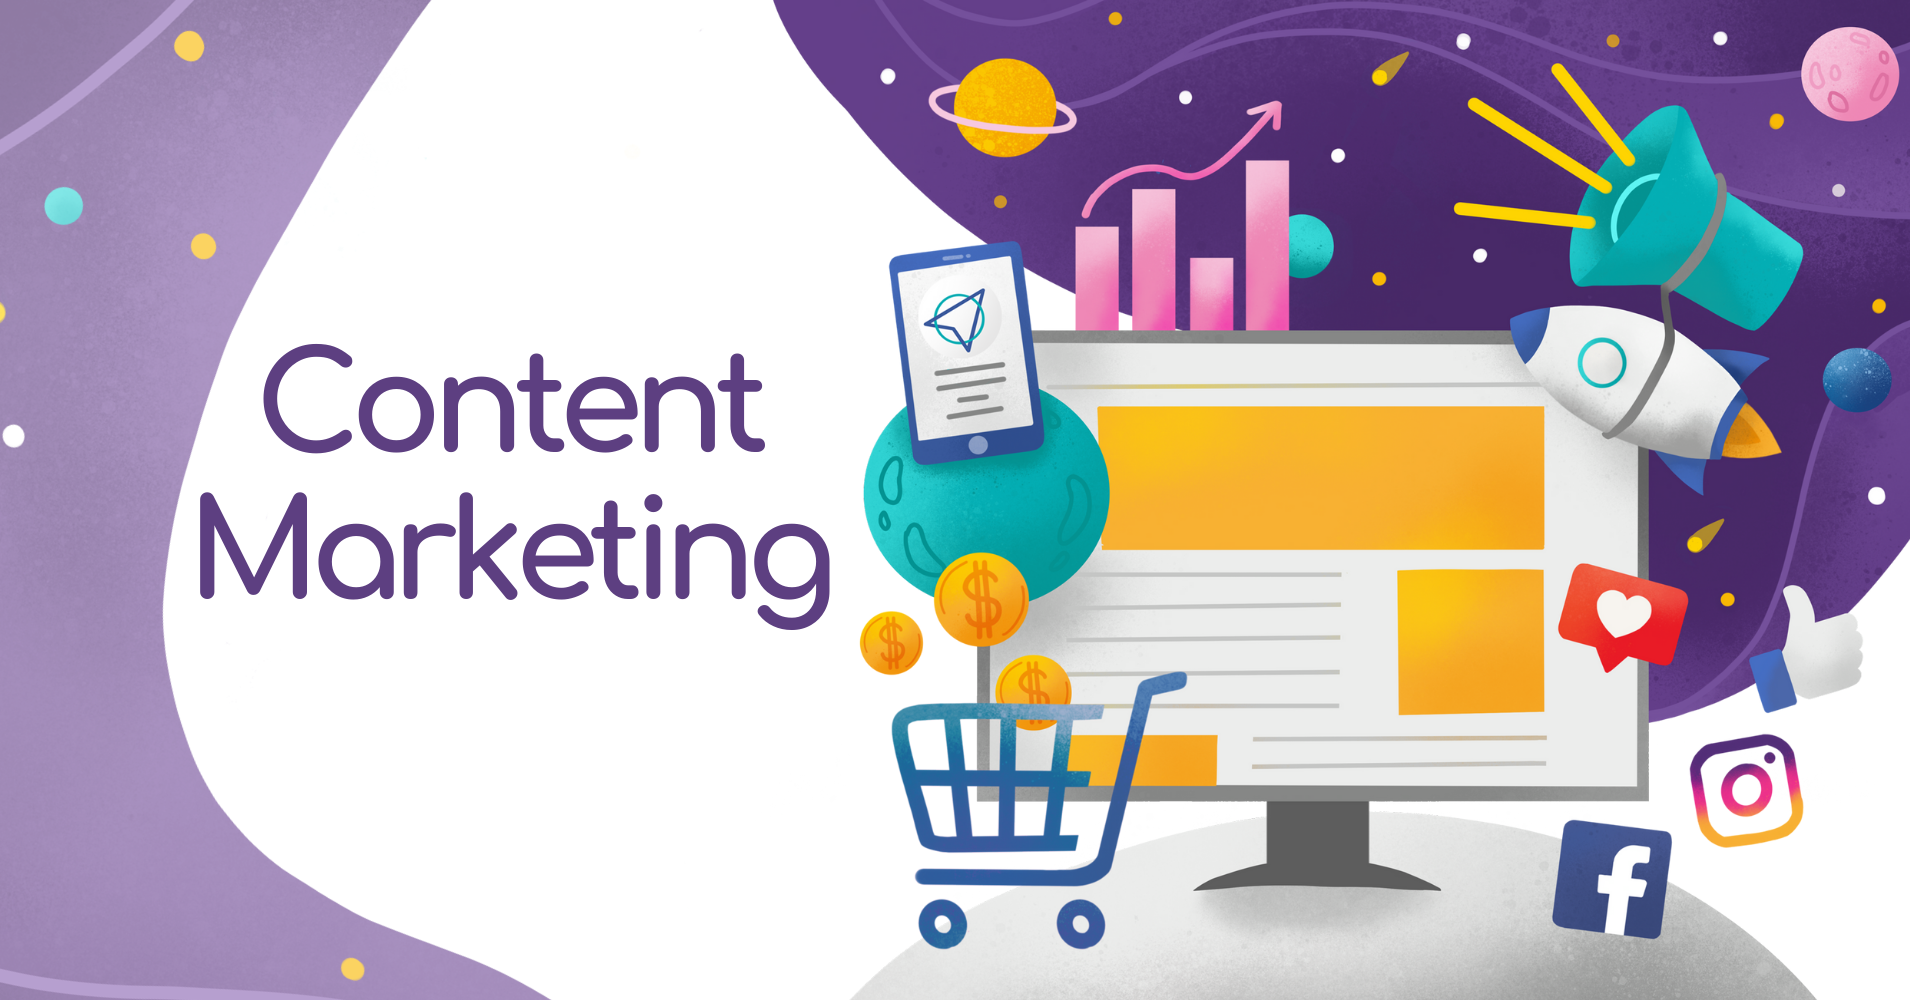 Content marketing, a way to build a professional image of the company